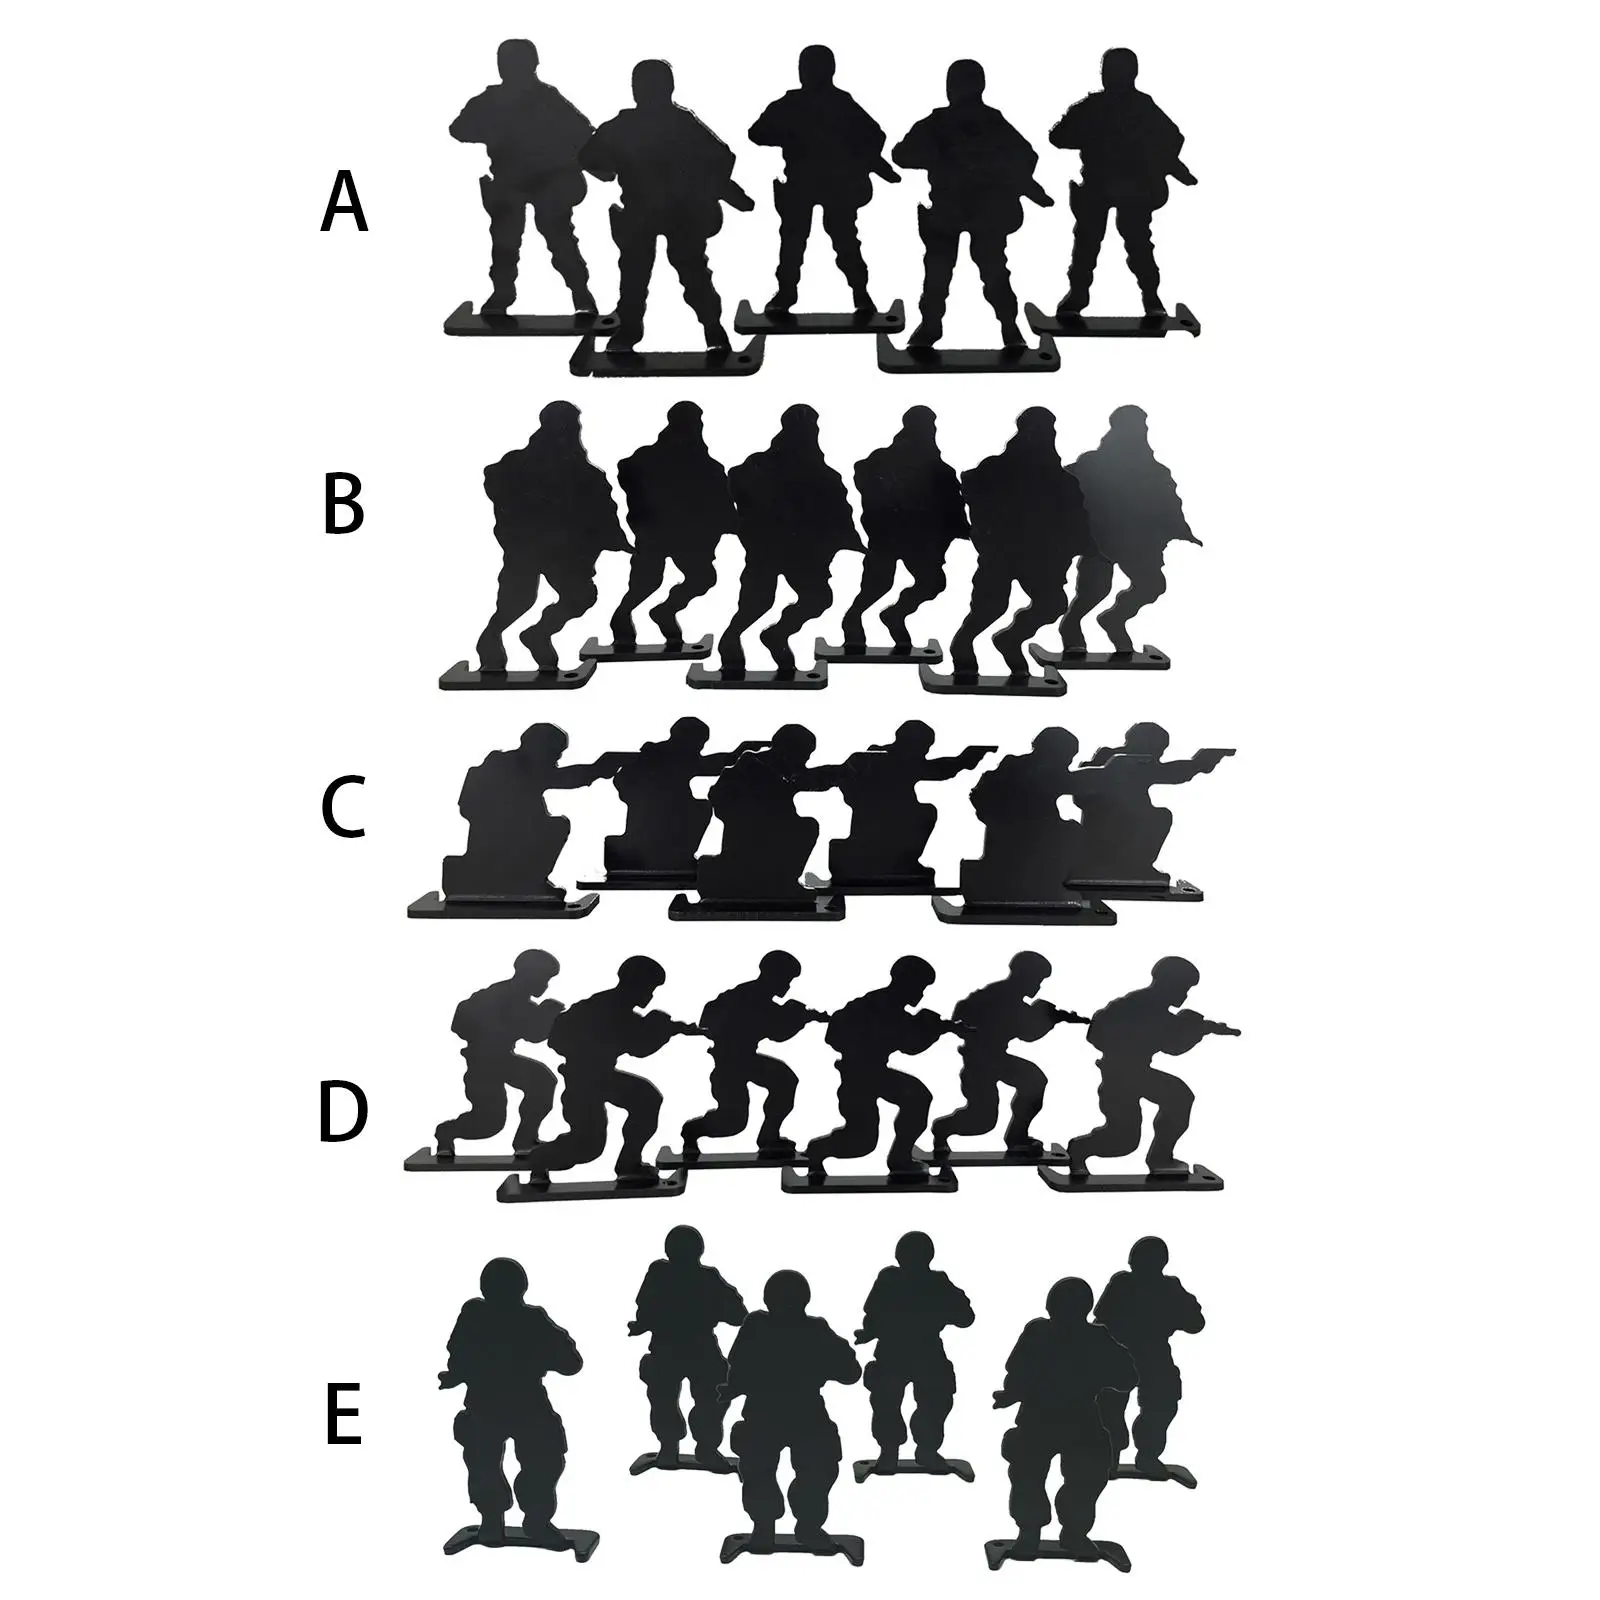 6x Durable Human Silhouette Target Set Soldier Shape Carbon Steel Metal Tool for Adult Hunting Practice Practicing Wall Shooting